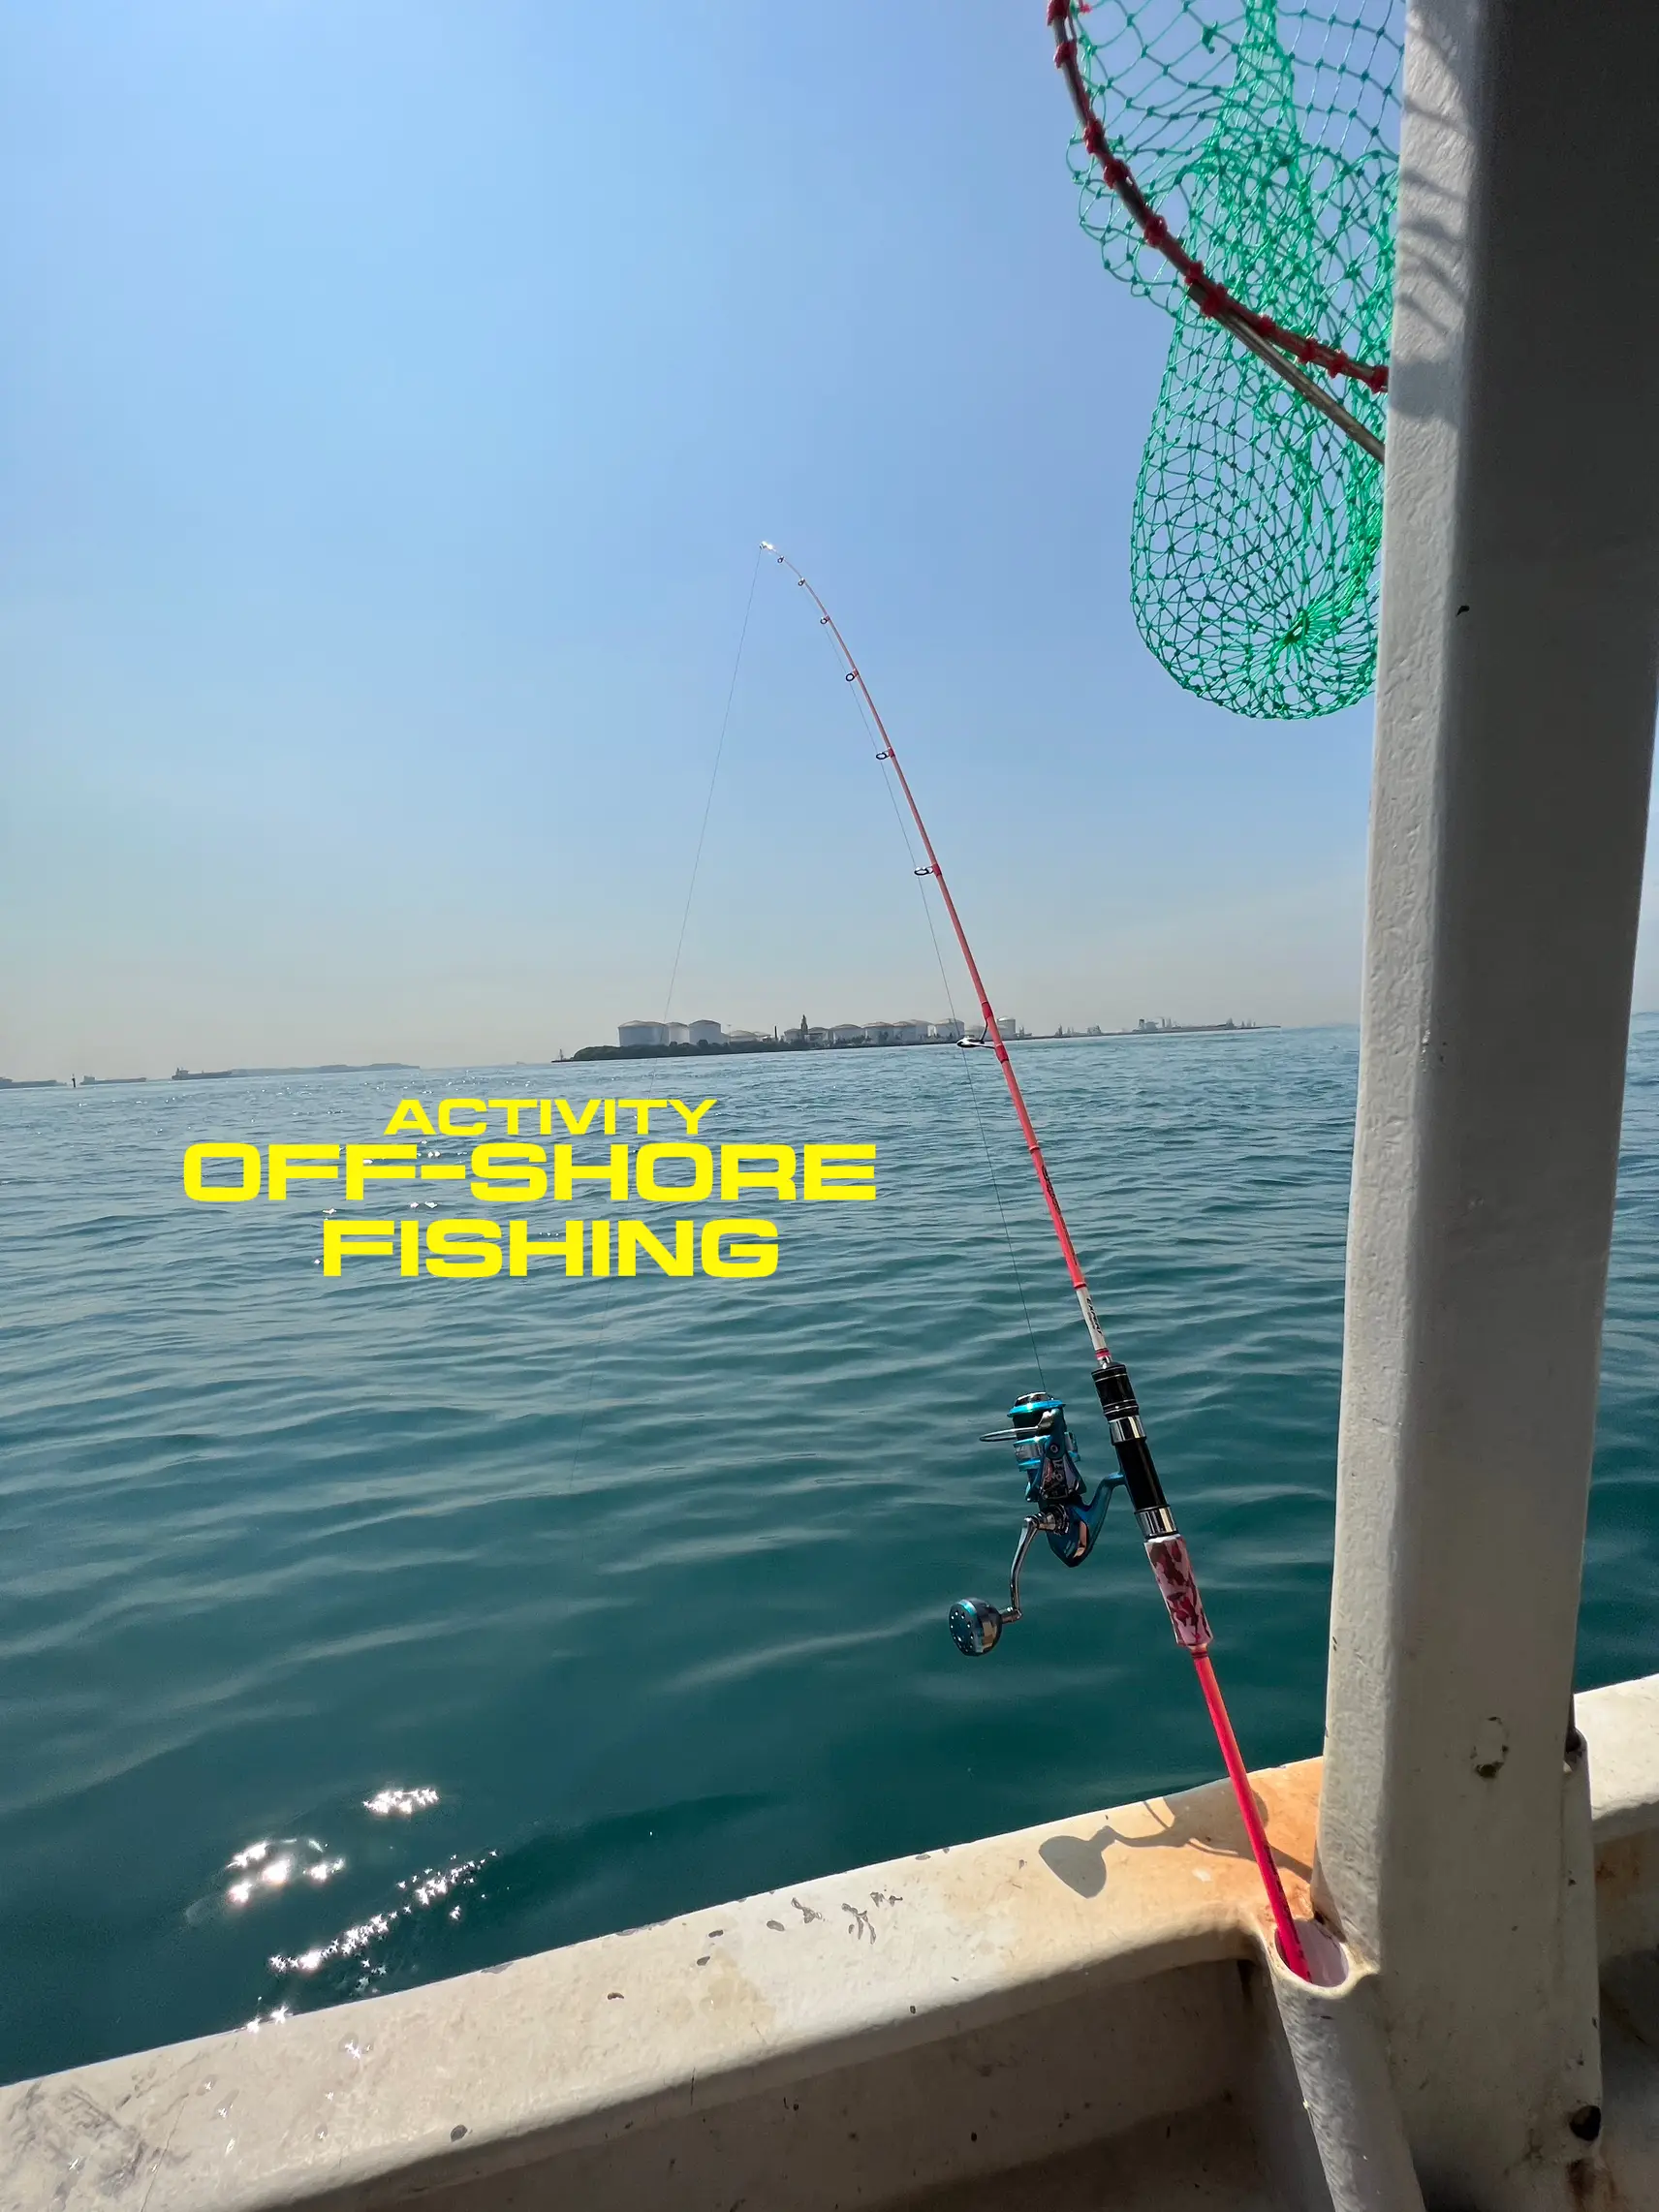 Things to do: Off-shore fishing!